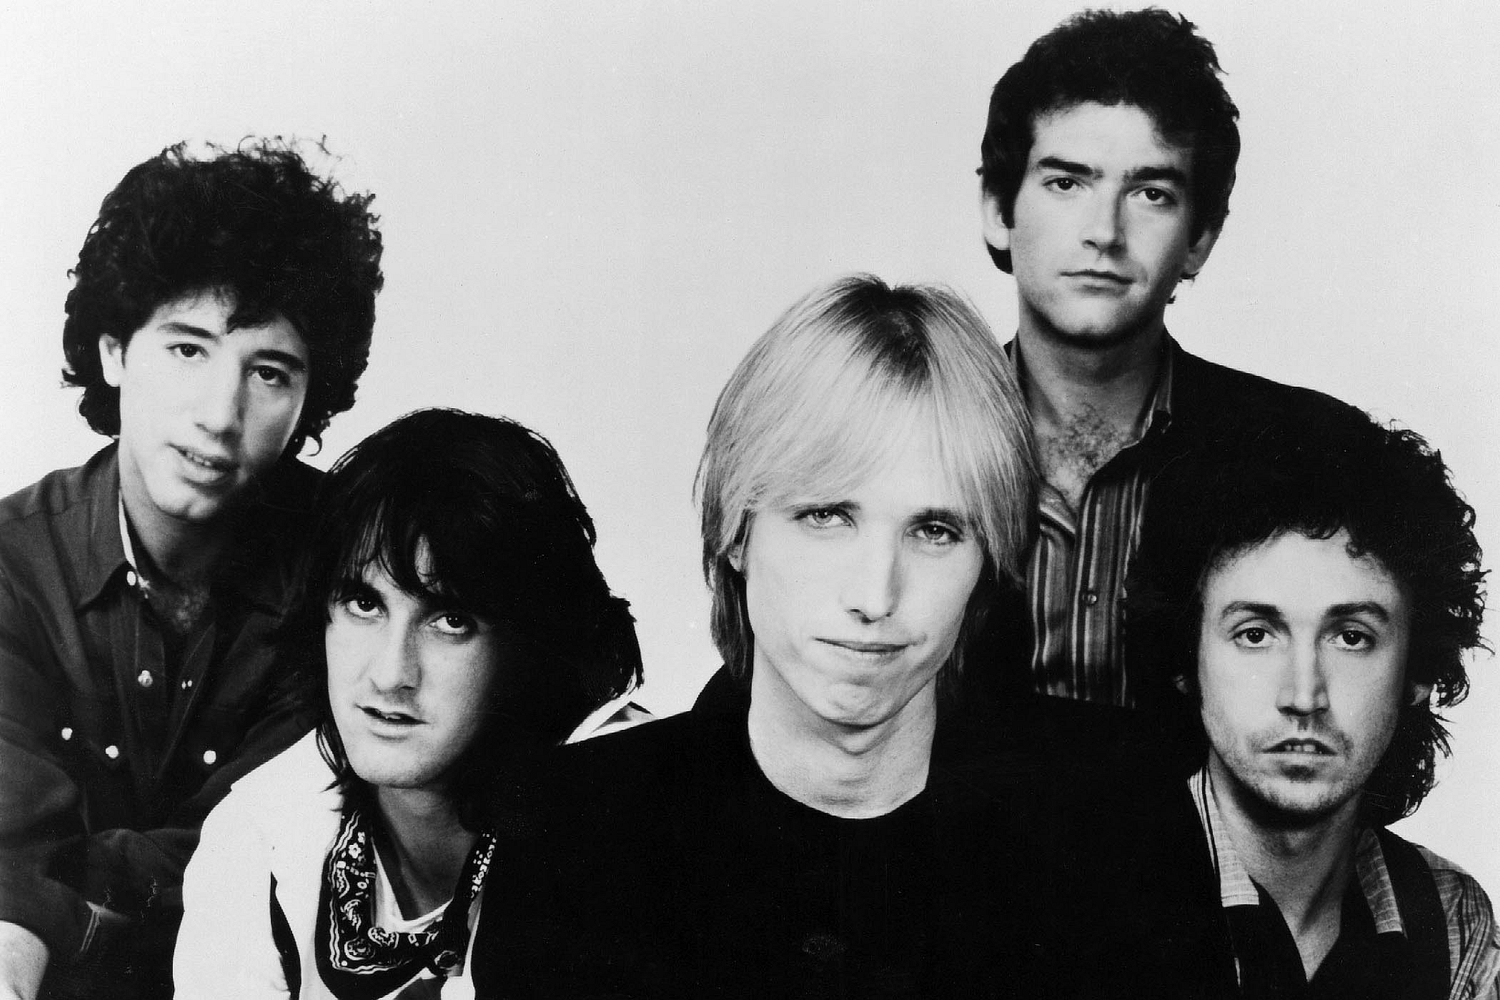 Hear previously-unreleased Tom Petty and the Heartbreakers track ‘For Real’